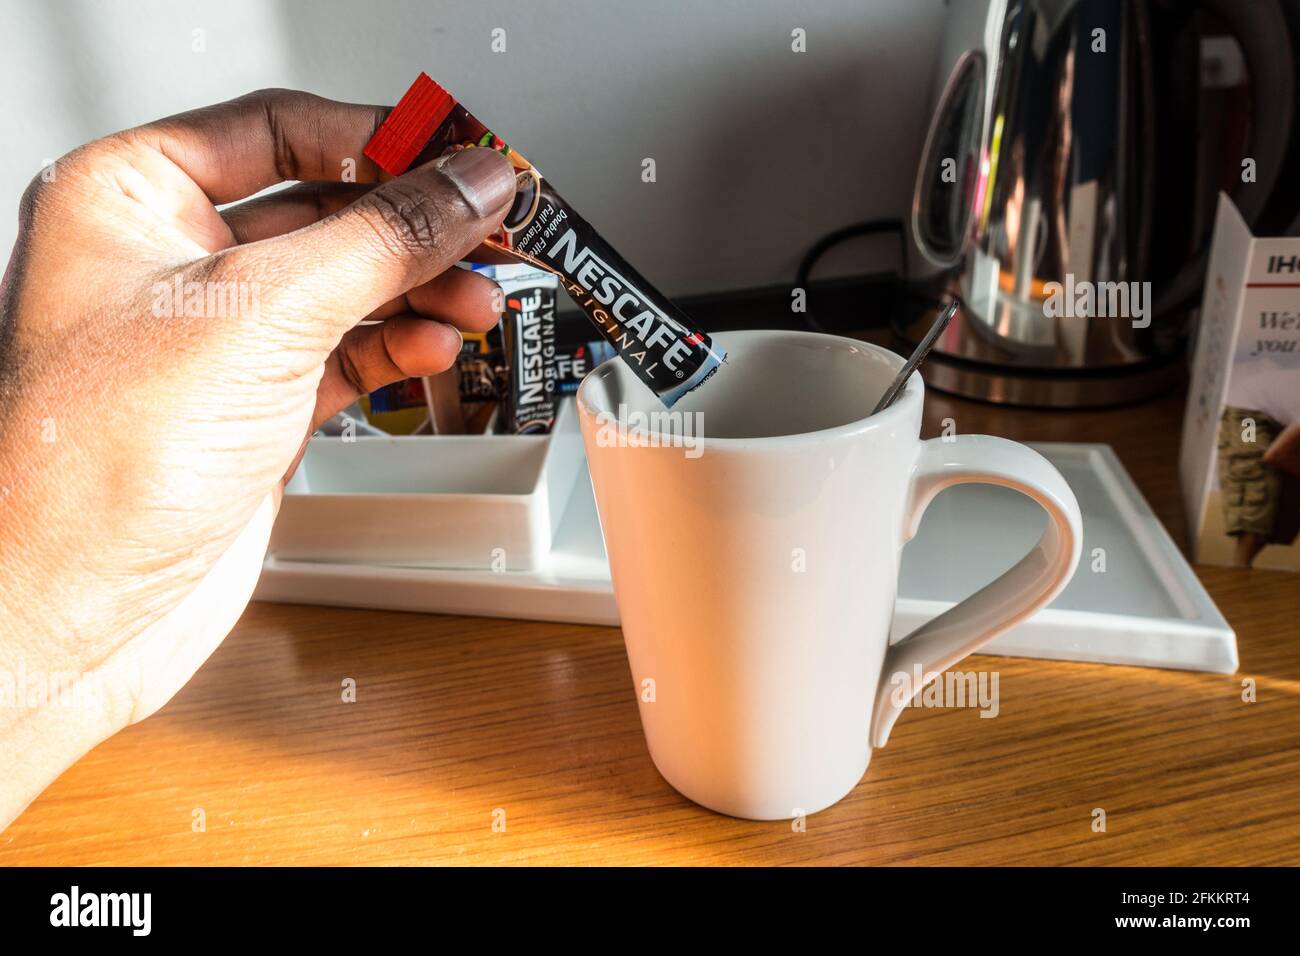 Adult Asian male hand pouring coffee powder from sachet into cup at a hotel room Stock Photo